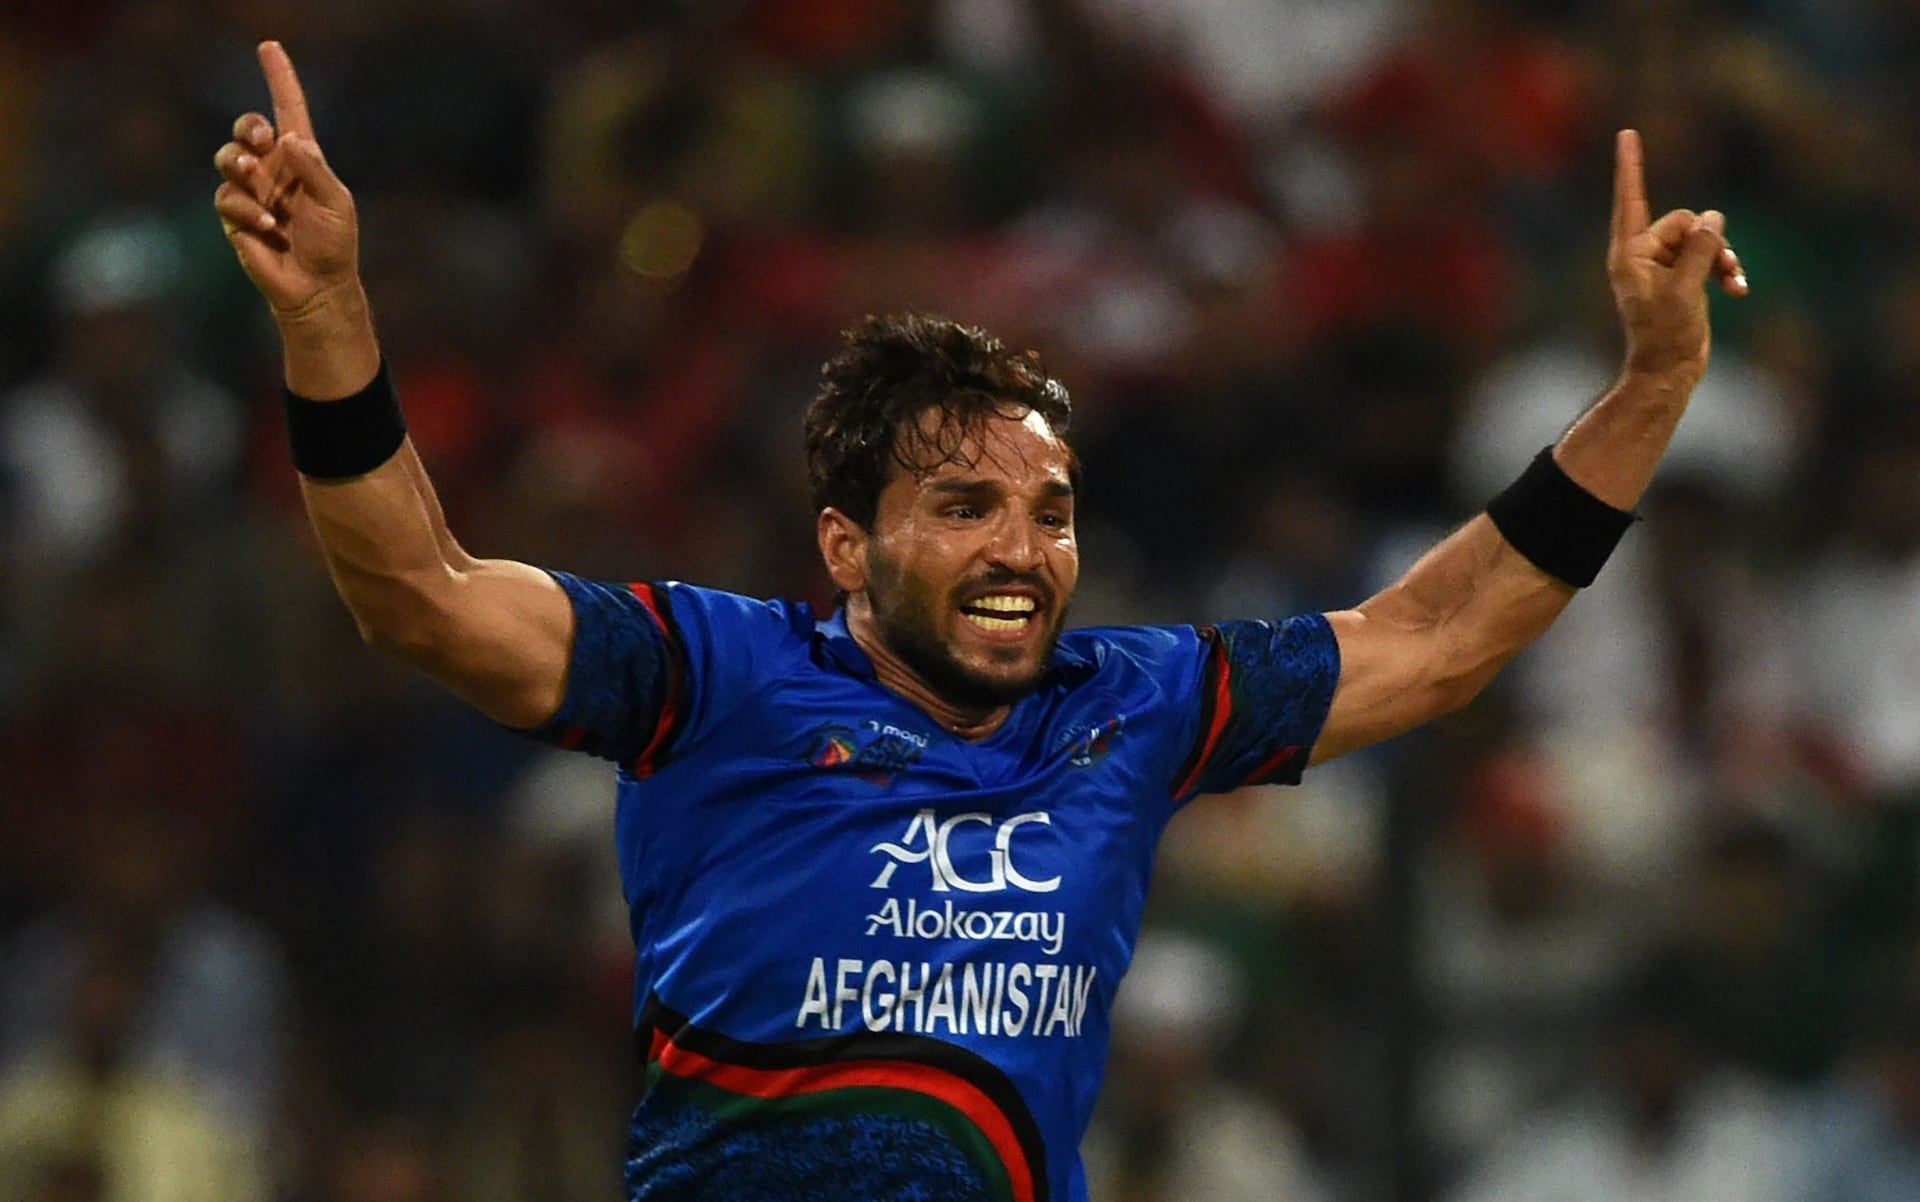 Afghanistan appoint Gulbadin Naib as captain for Cricket World Cup